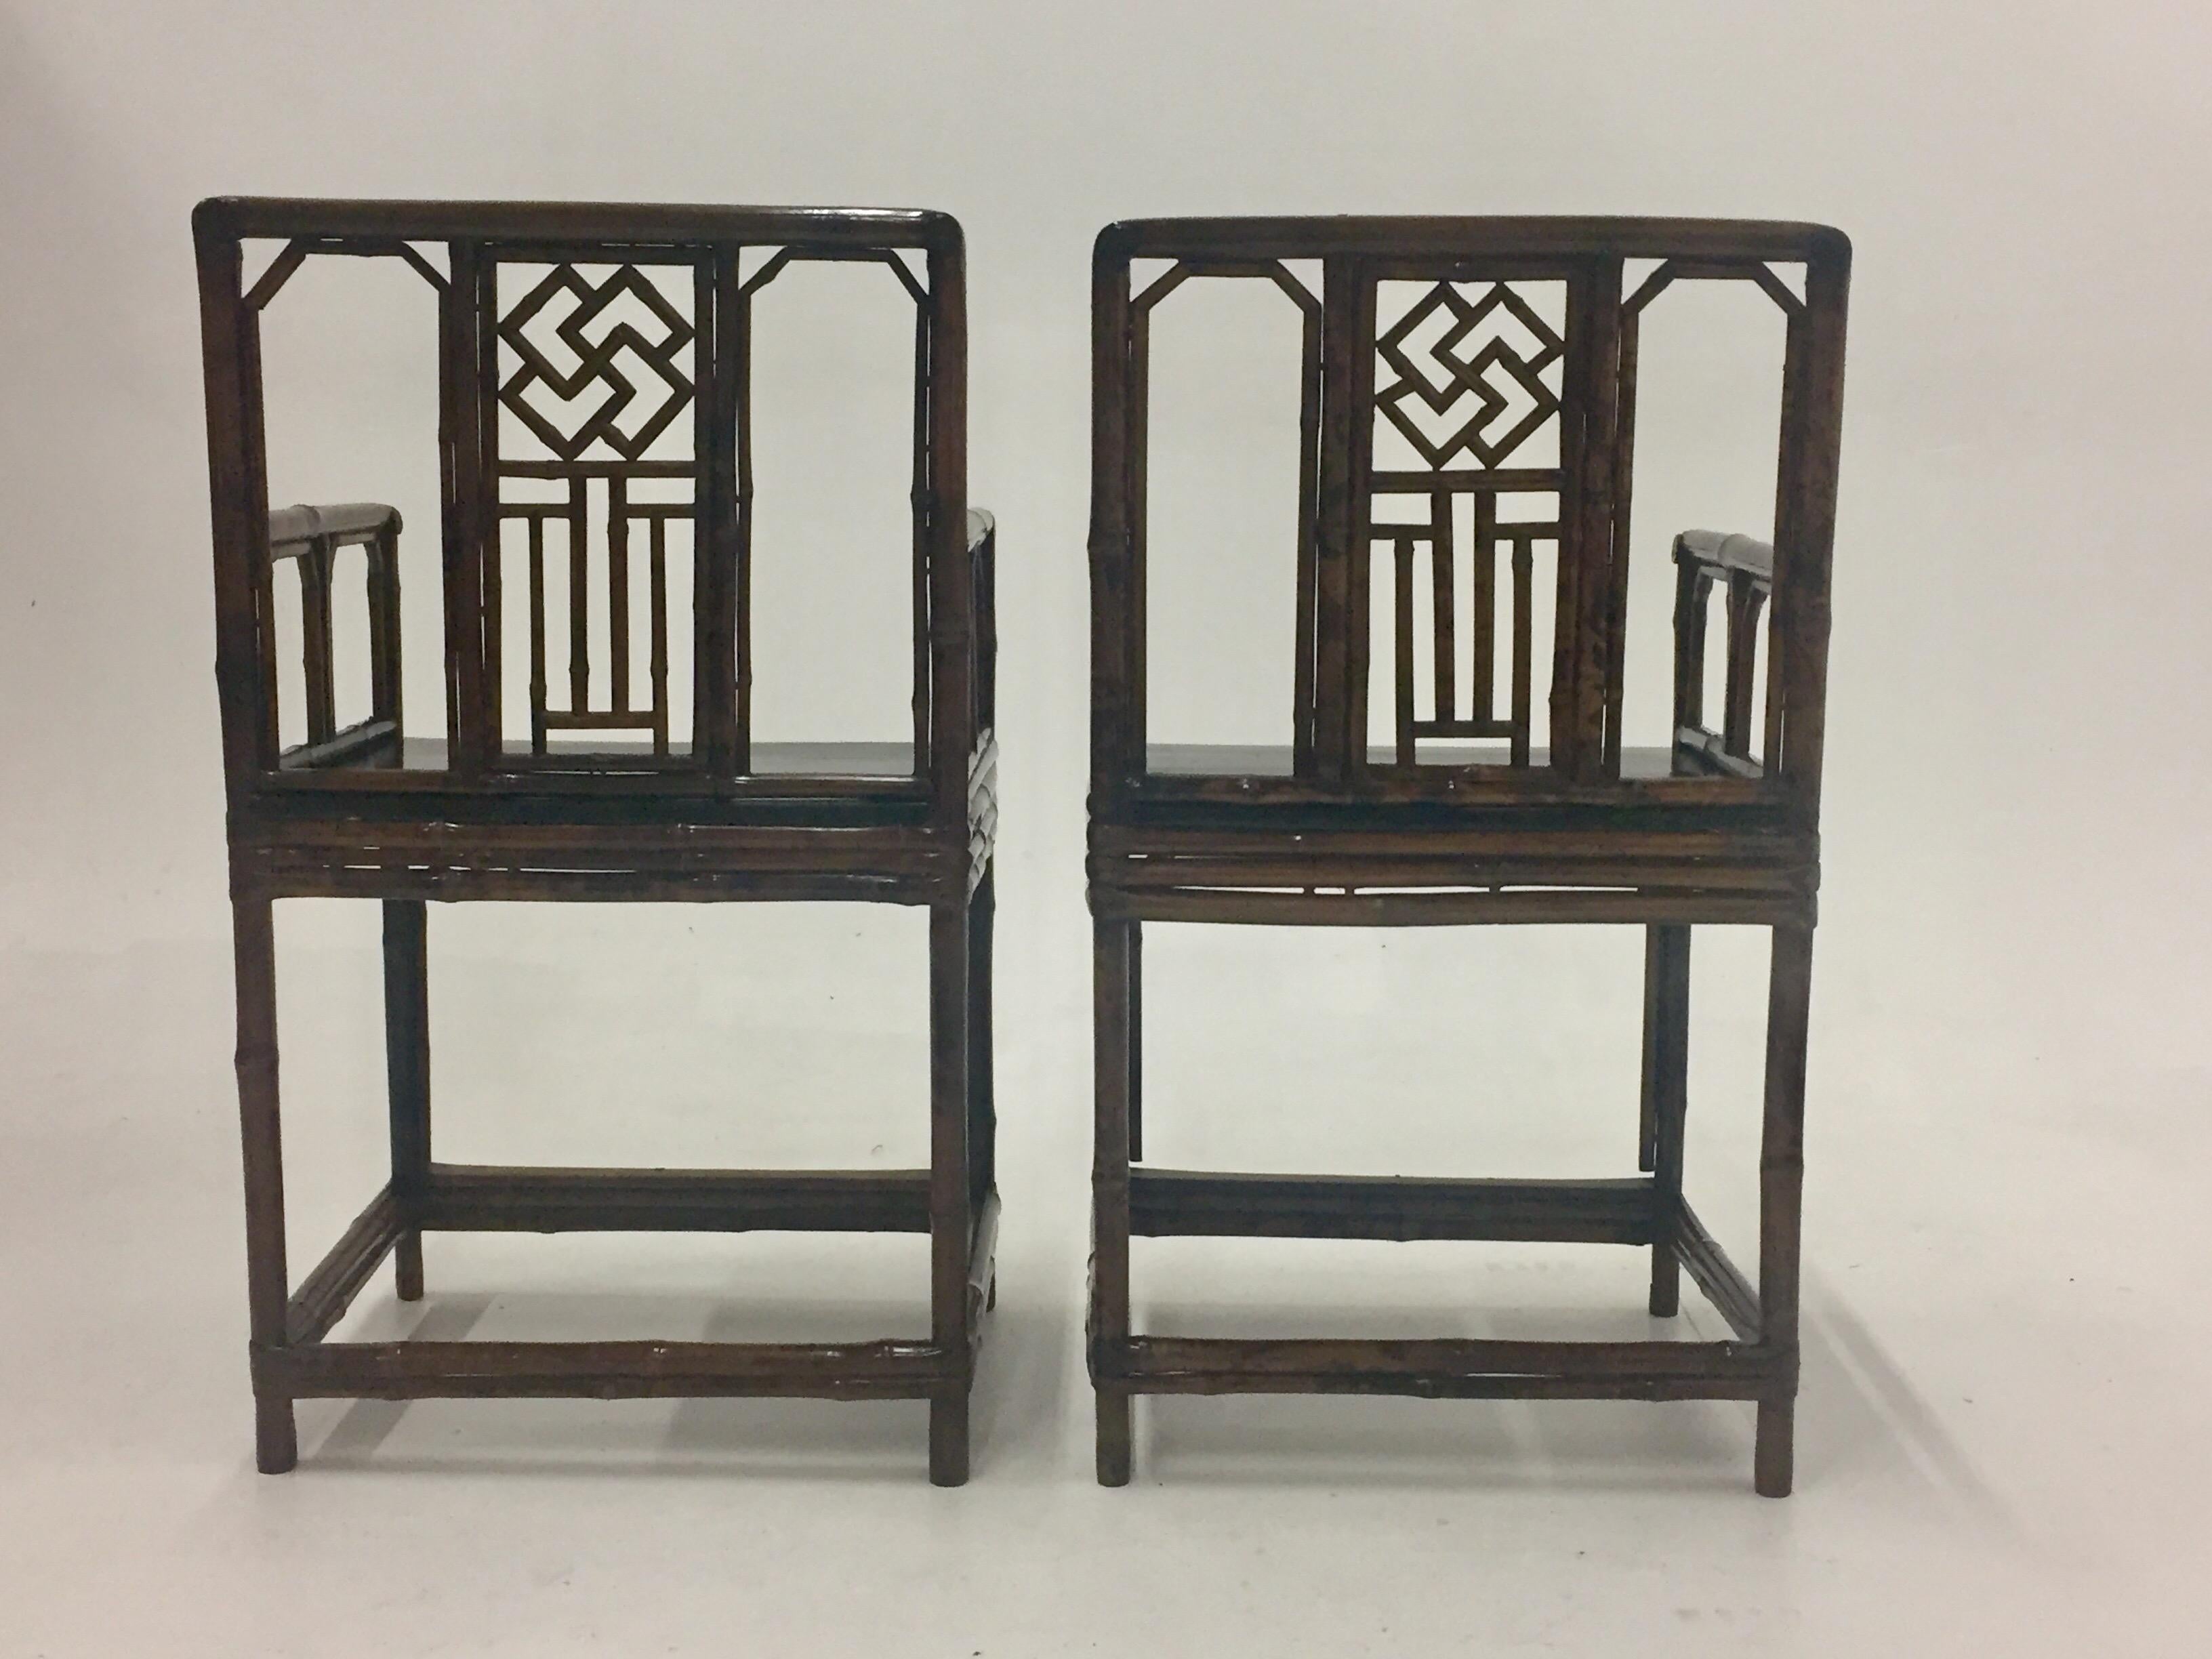 An impressive pair of Asian armchairs having a faux tortoise finish with a lacquered black seat.
Measures: Arm height 28
seat height 20.